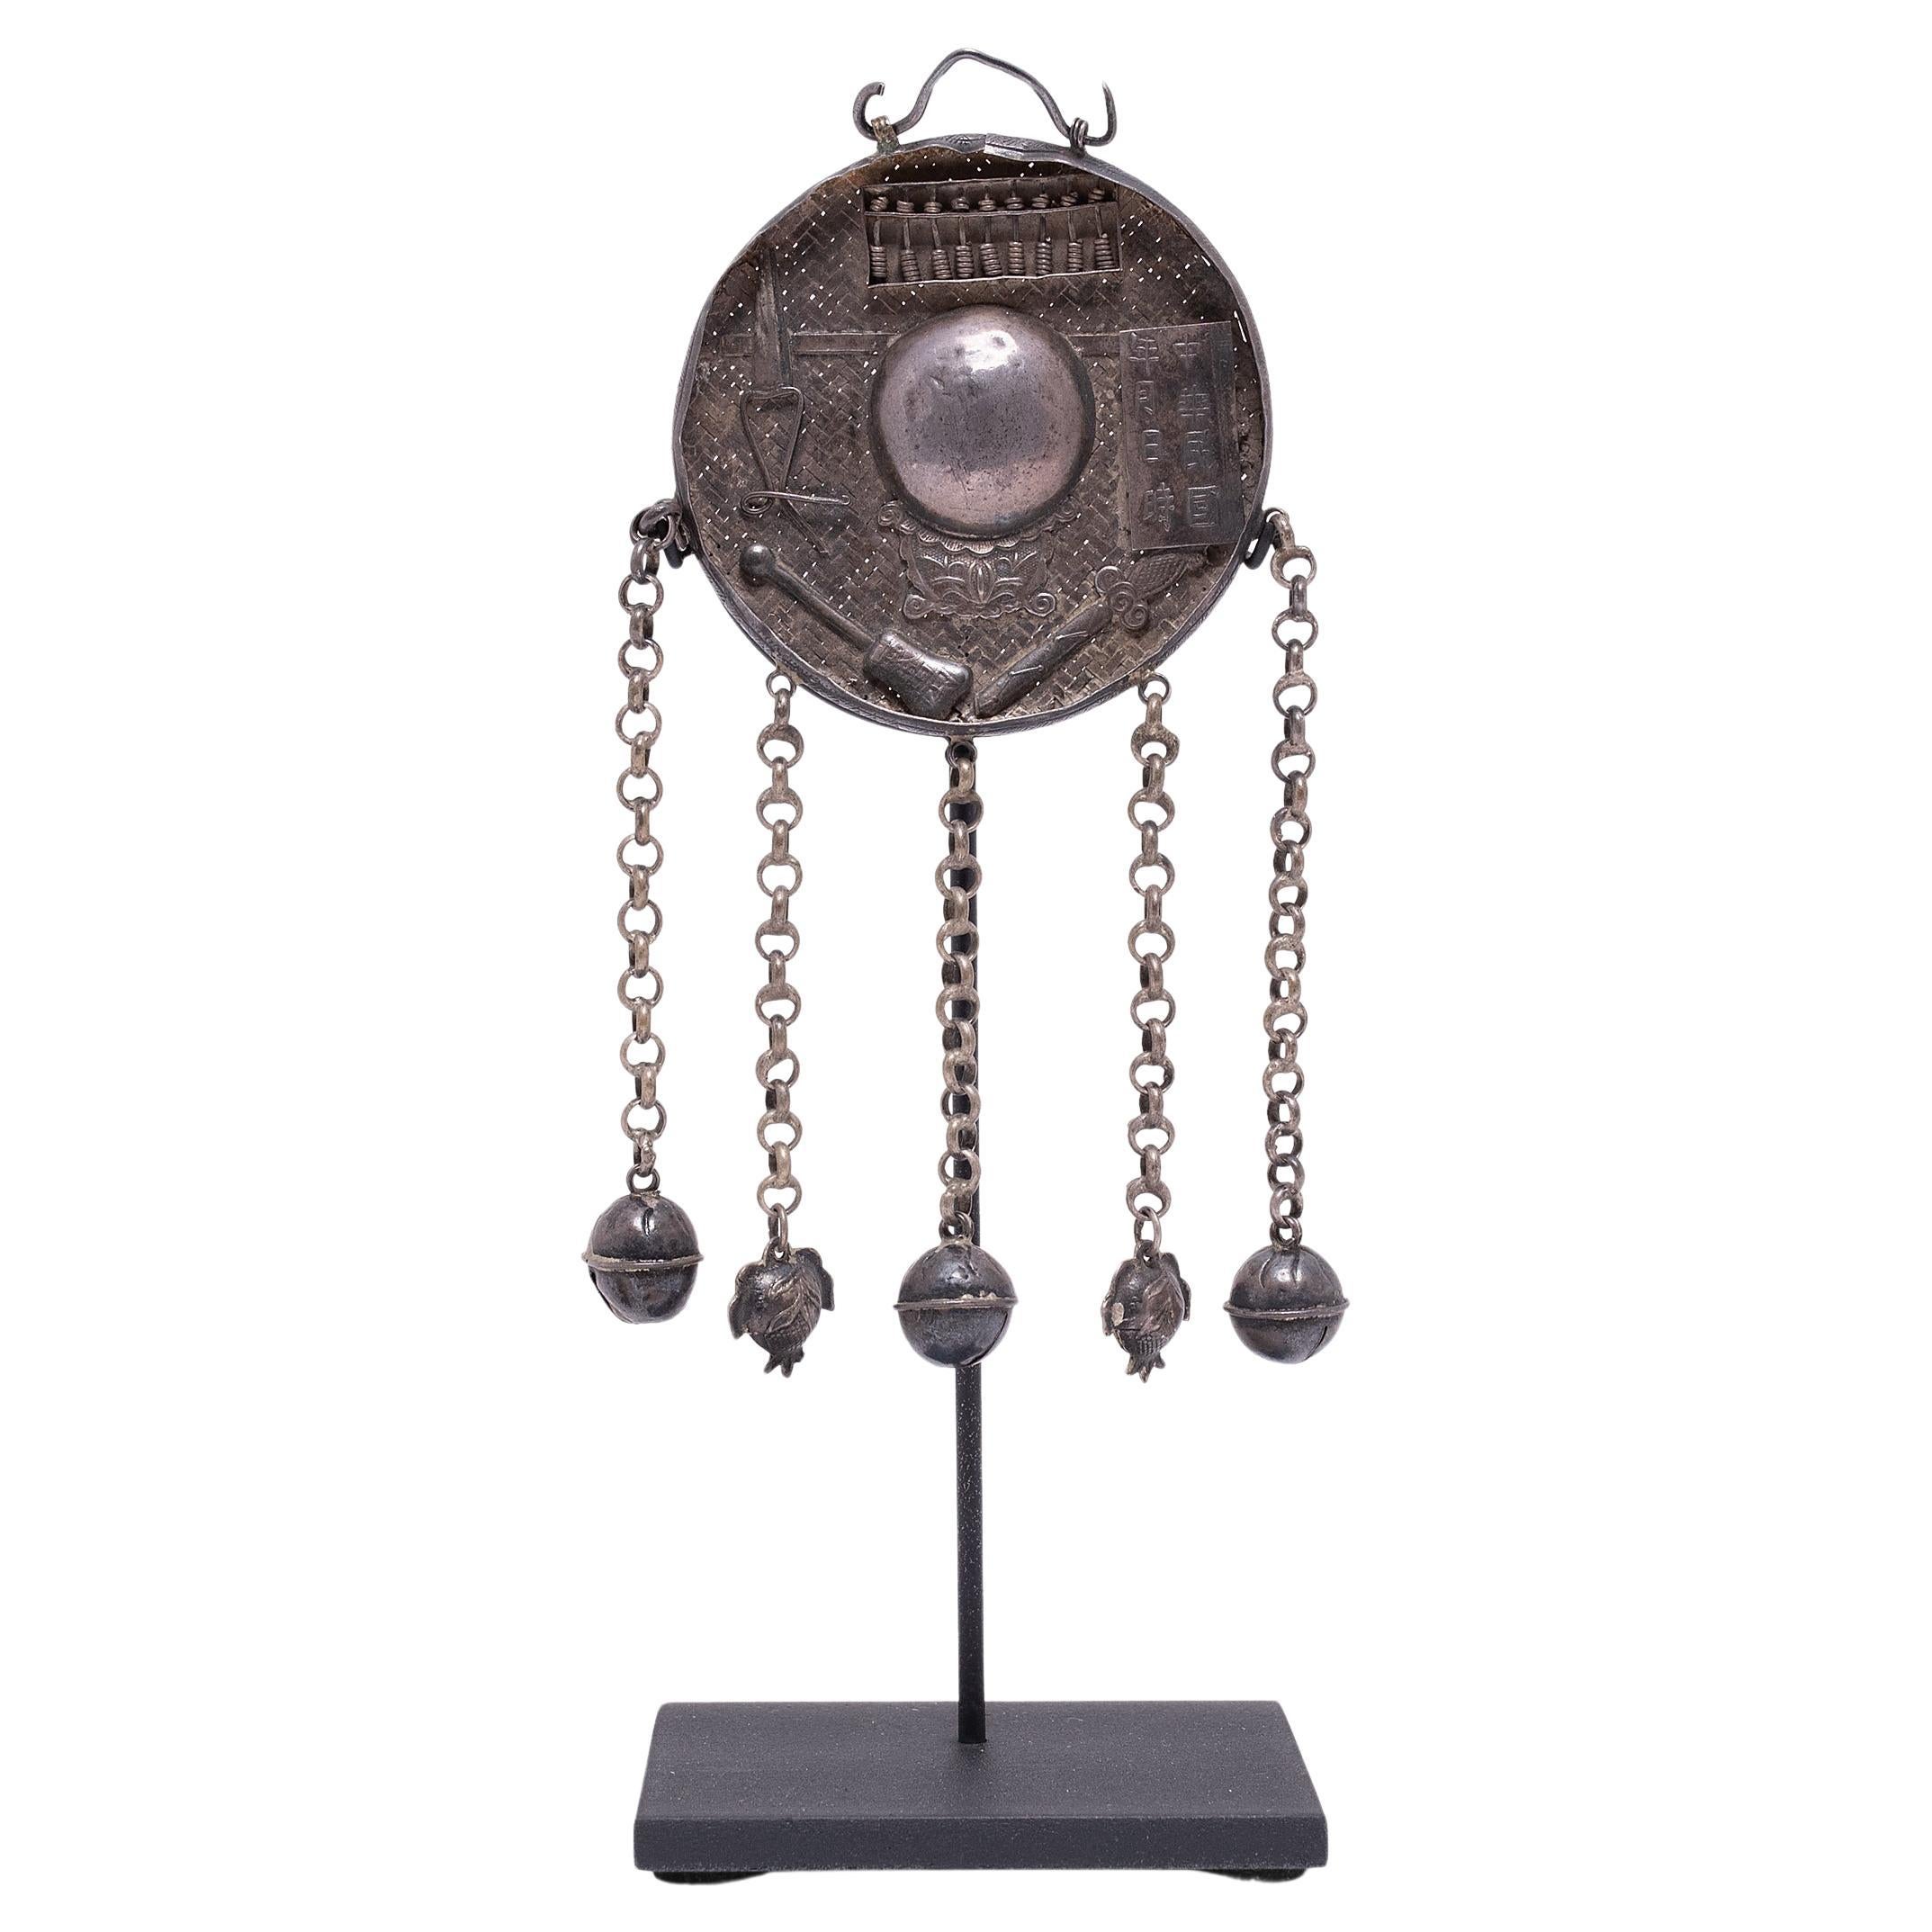 Silver Chinese Merchant's Charm with Bells, c. 1900